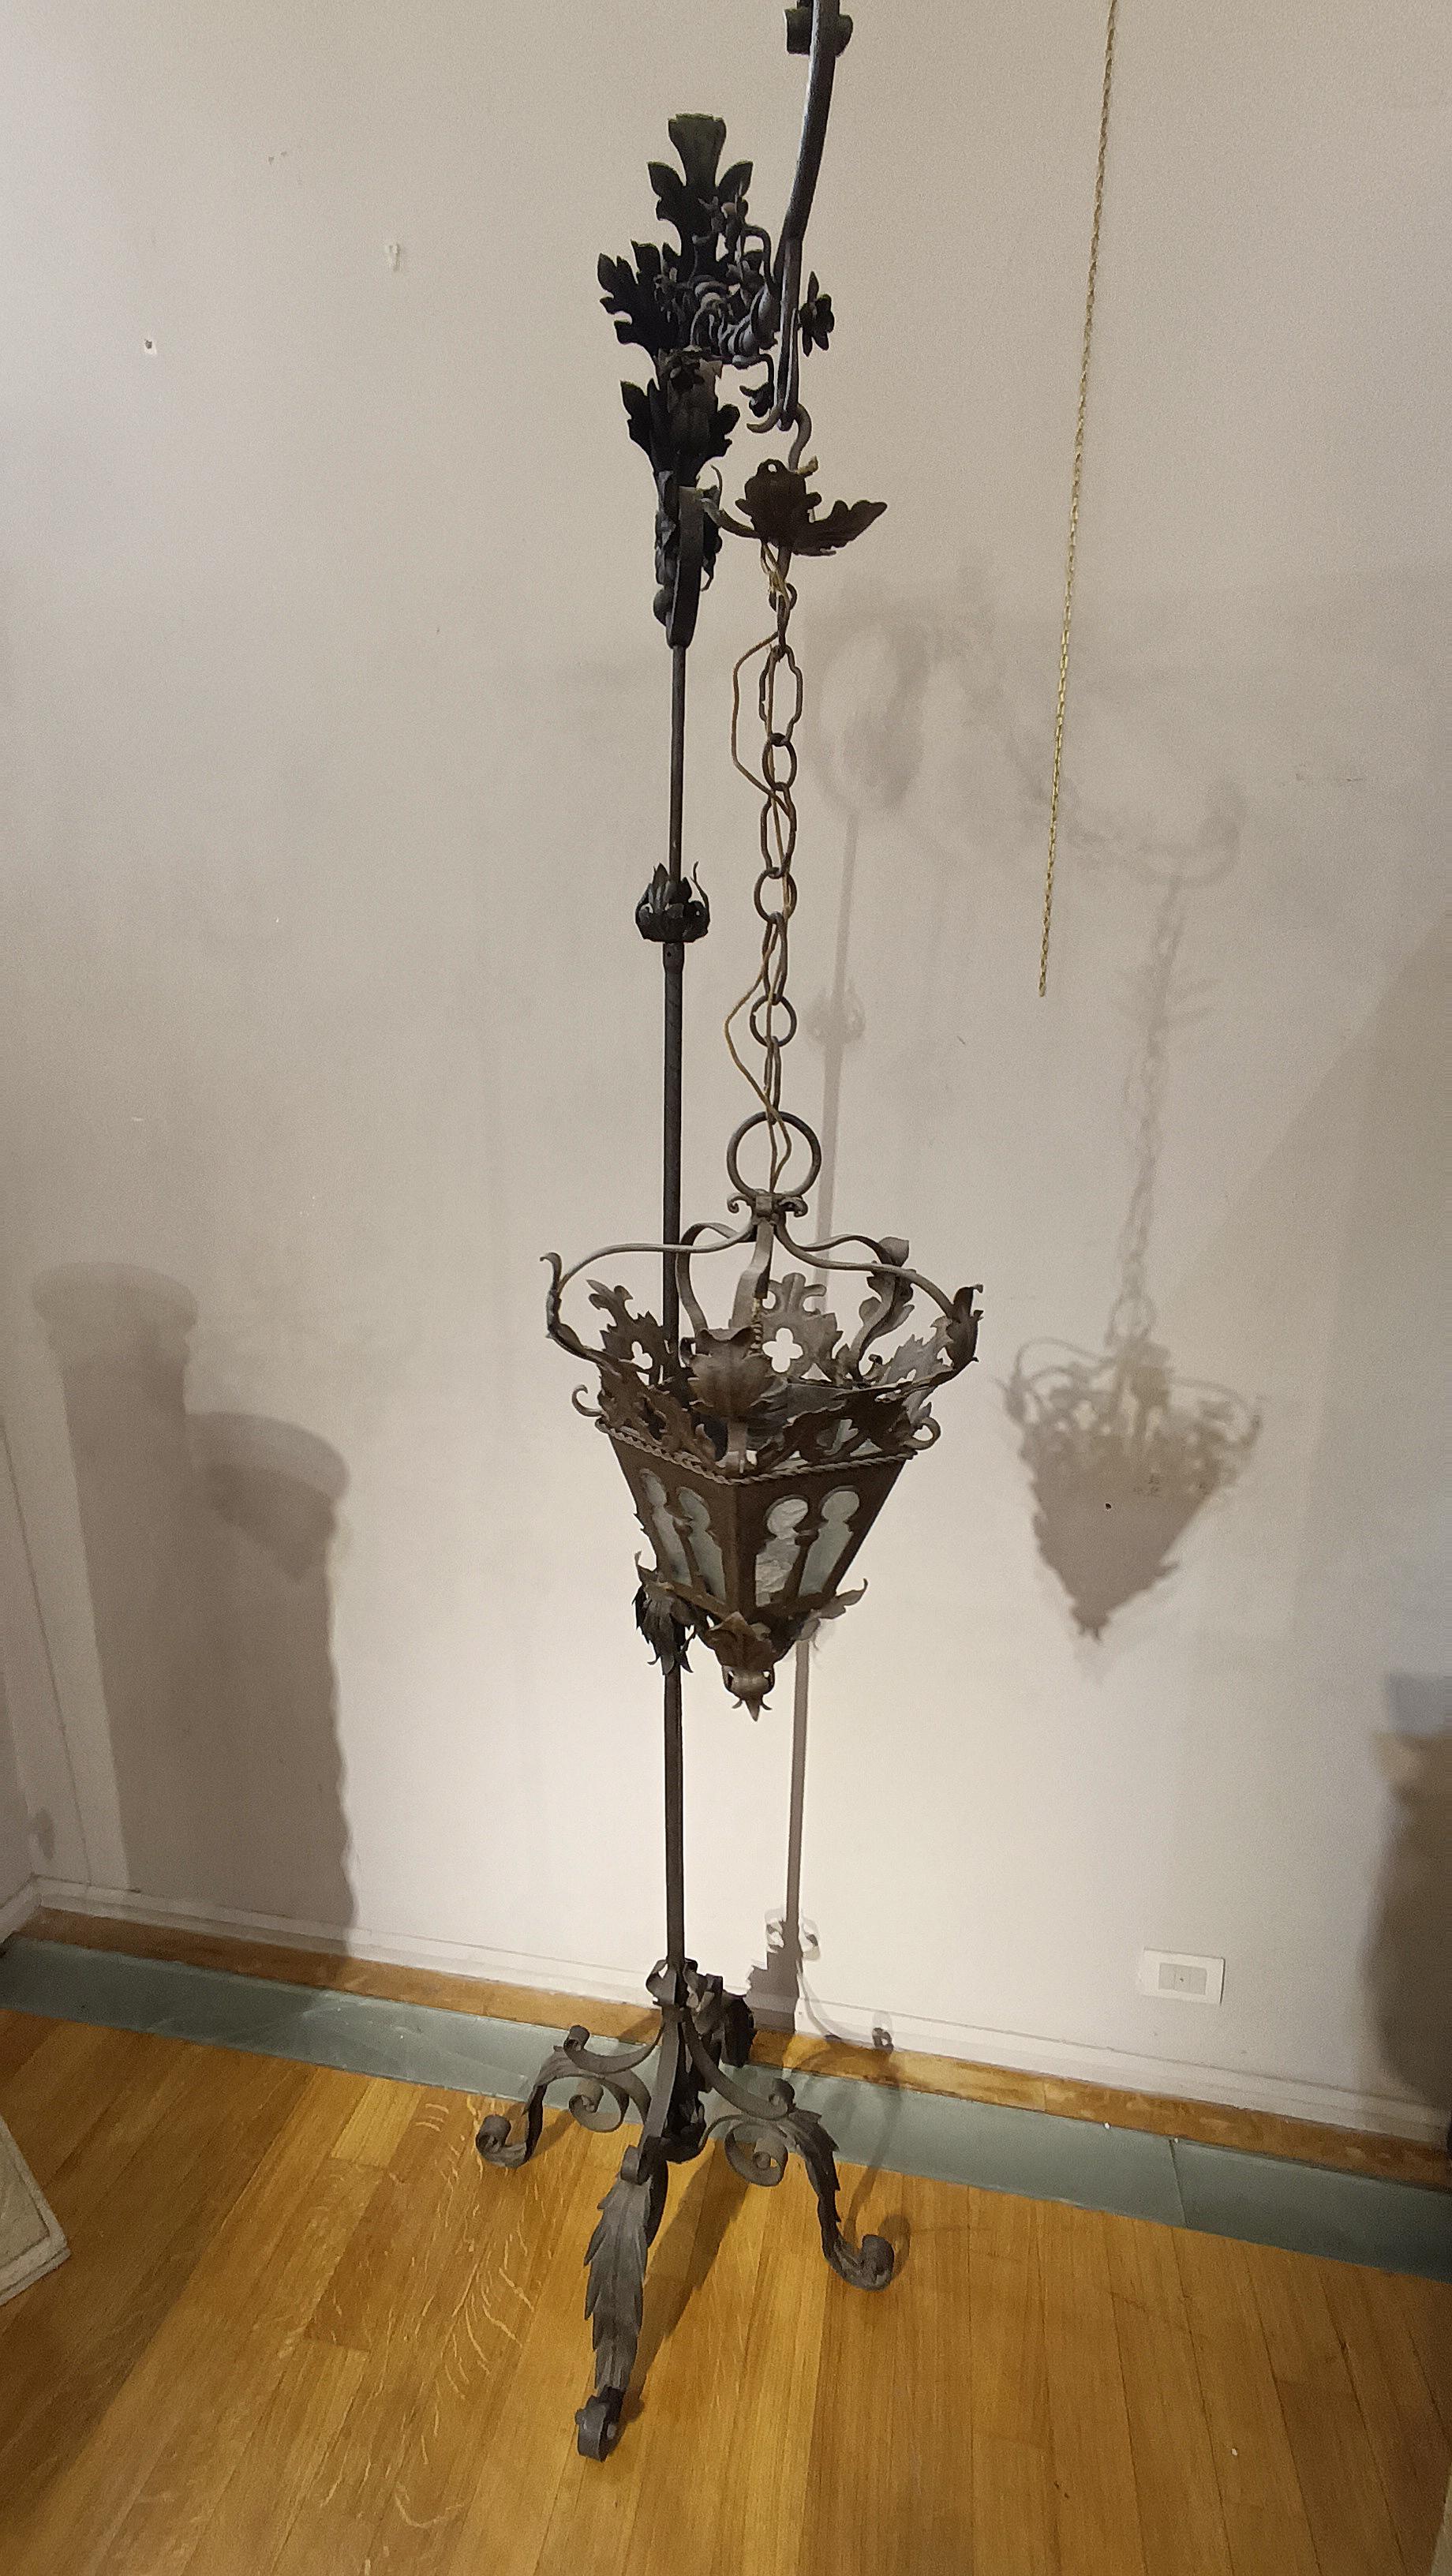 END OF THE 19th CENTURY IRON LANTERN HOLDER For Sale 5